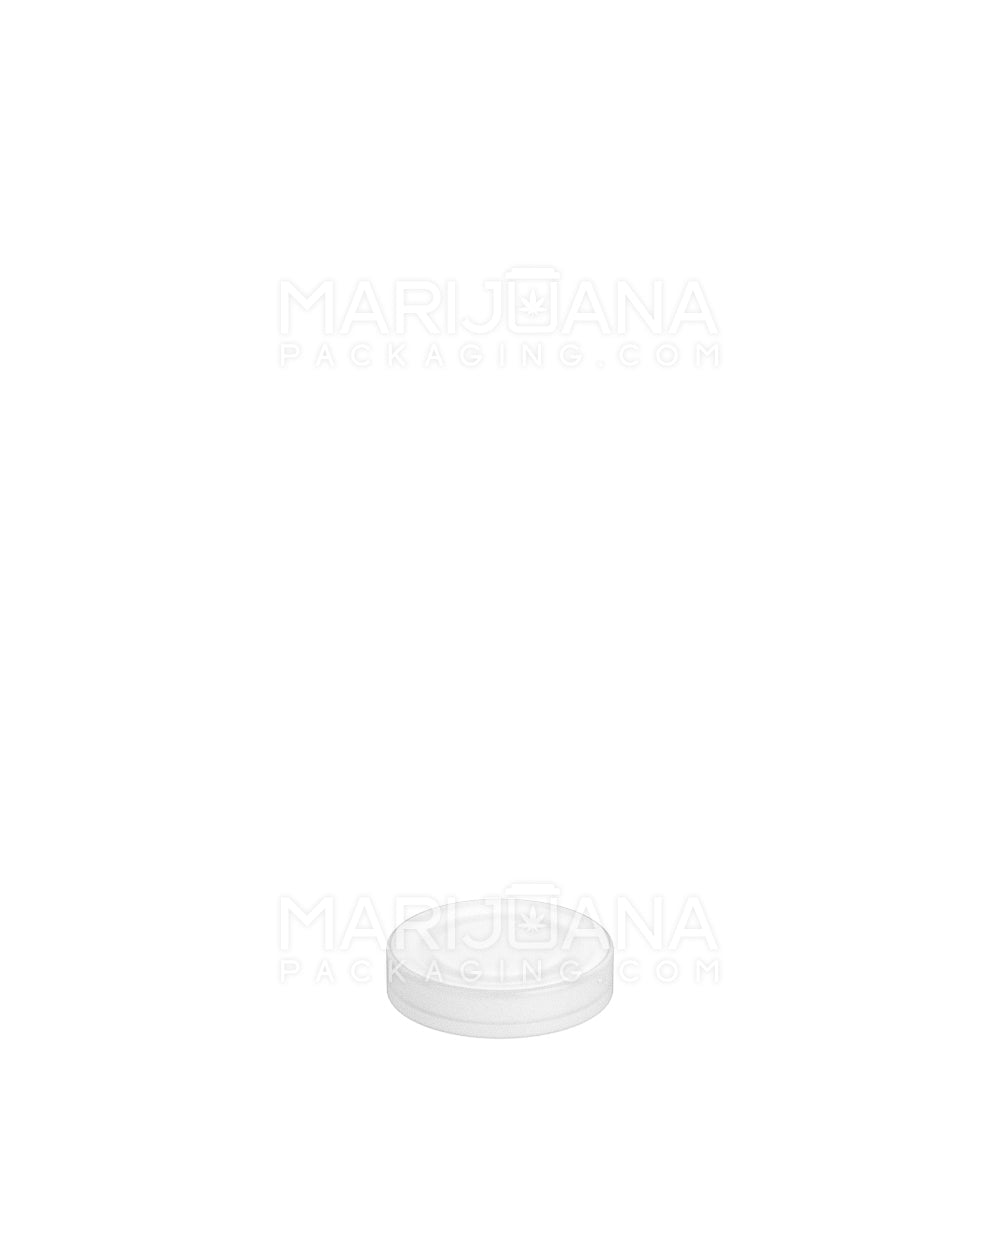 Clear Glass Concentrate Jar w/ Clear Cap | 25mm - 6mL - 1008 Count - 5